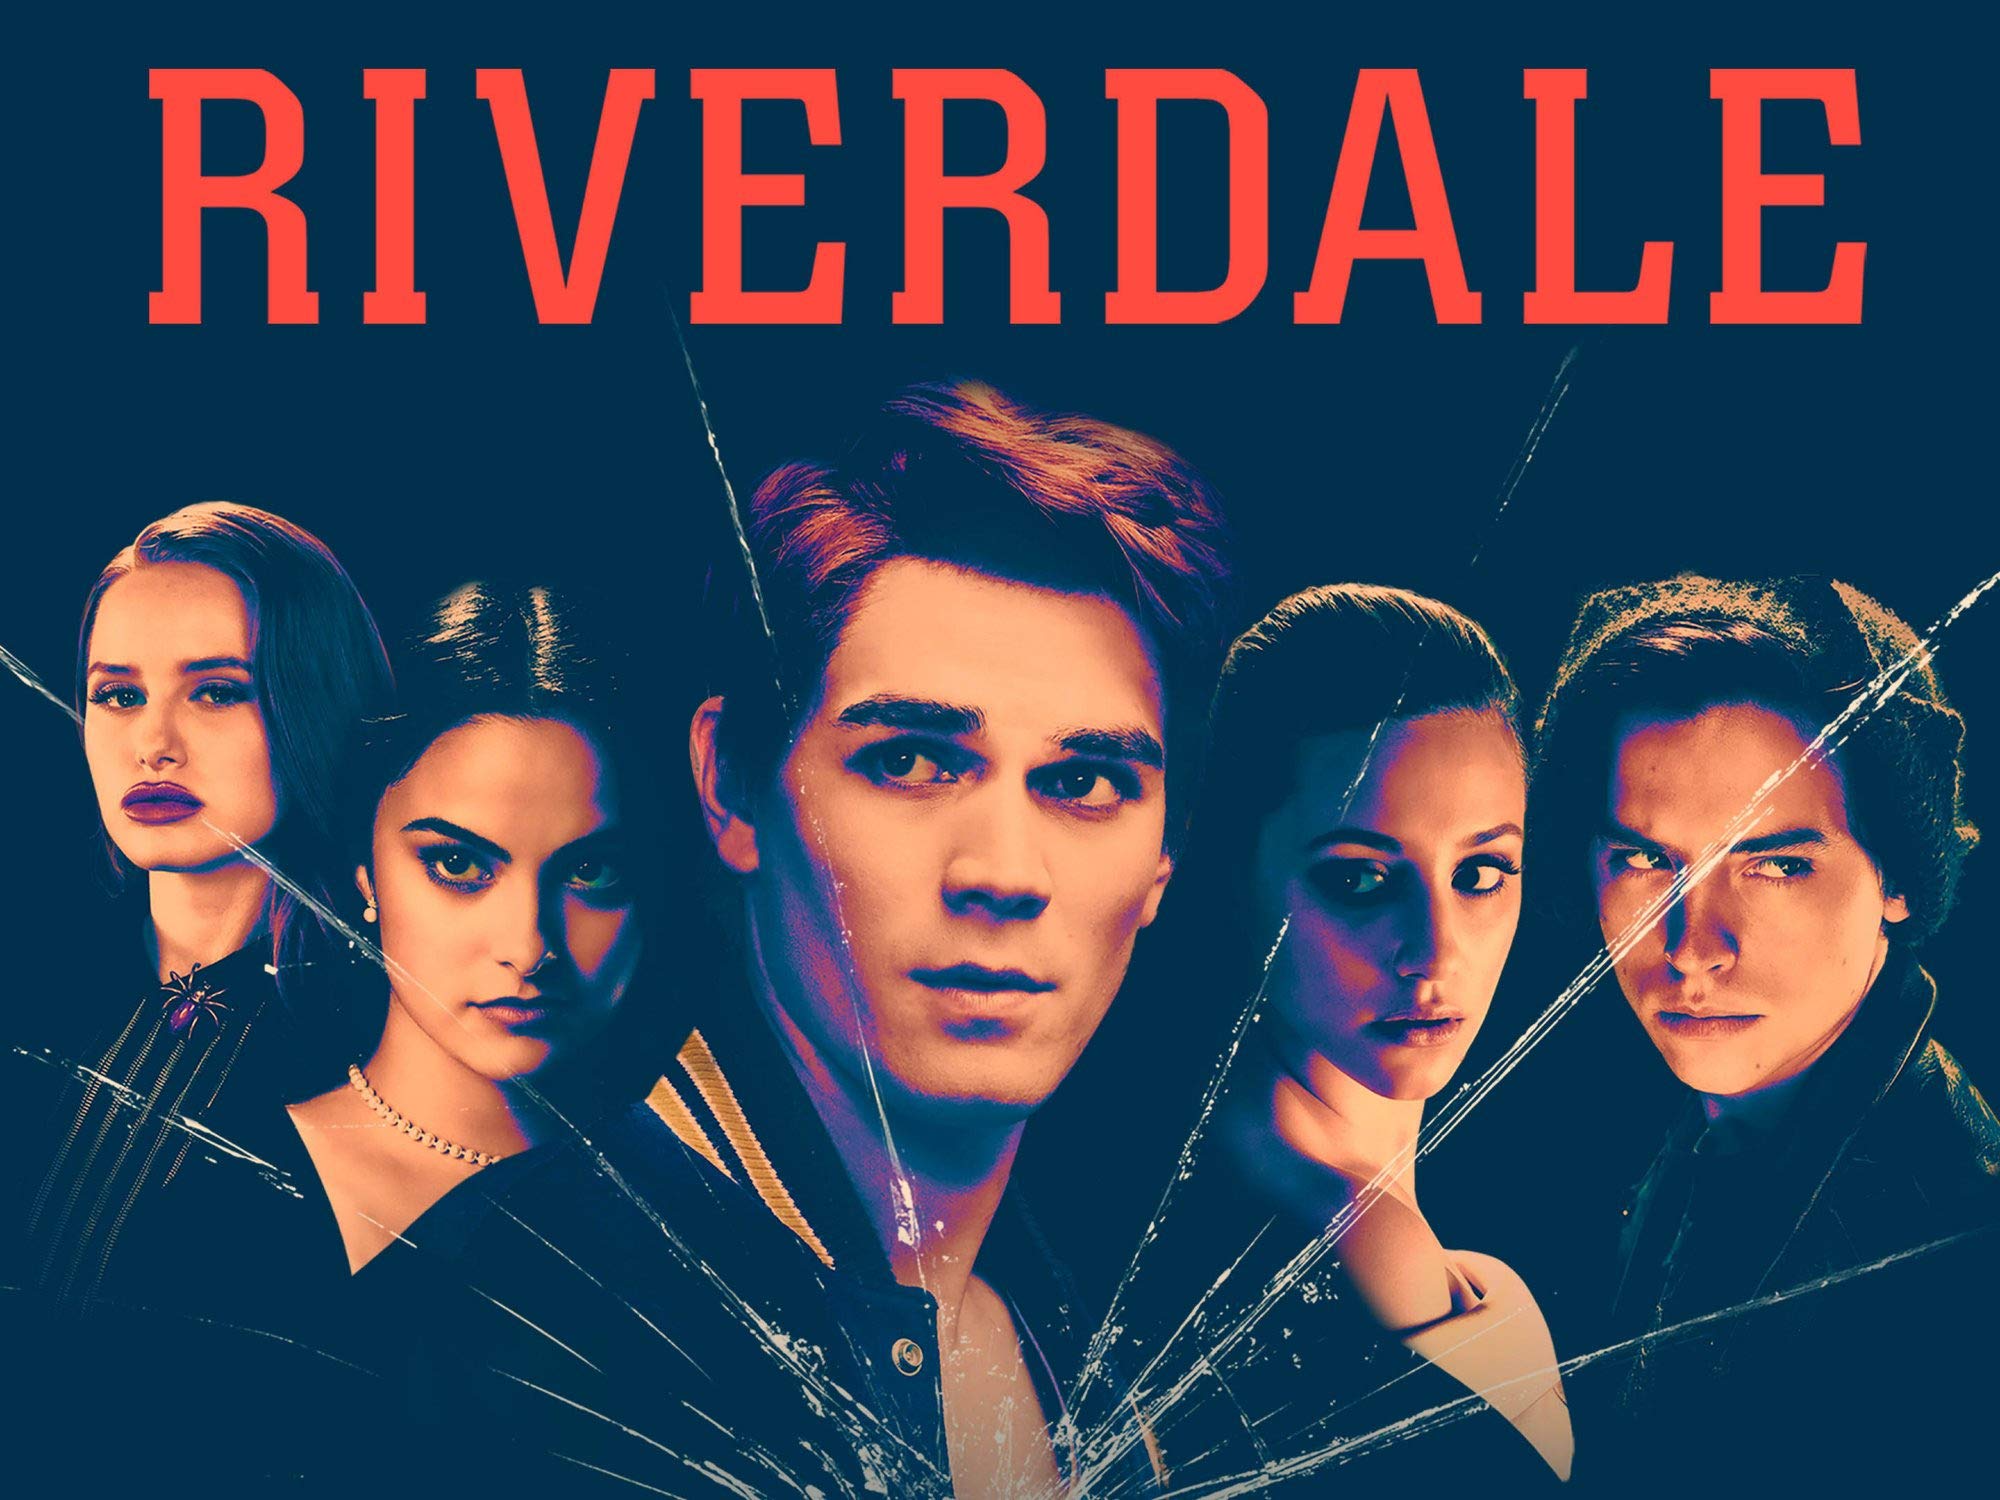 How Riverdale Season 5 will begin after a premature end in Season 4?